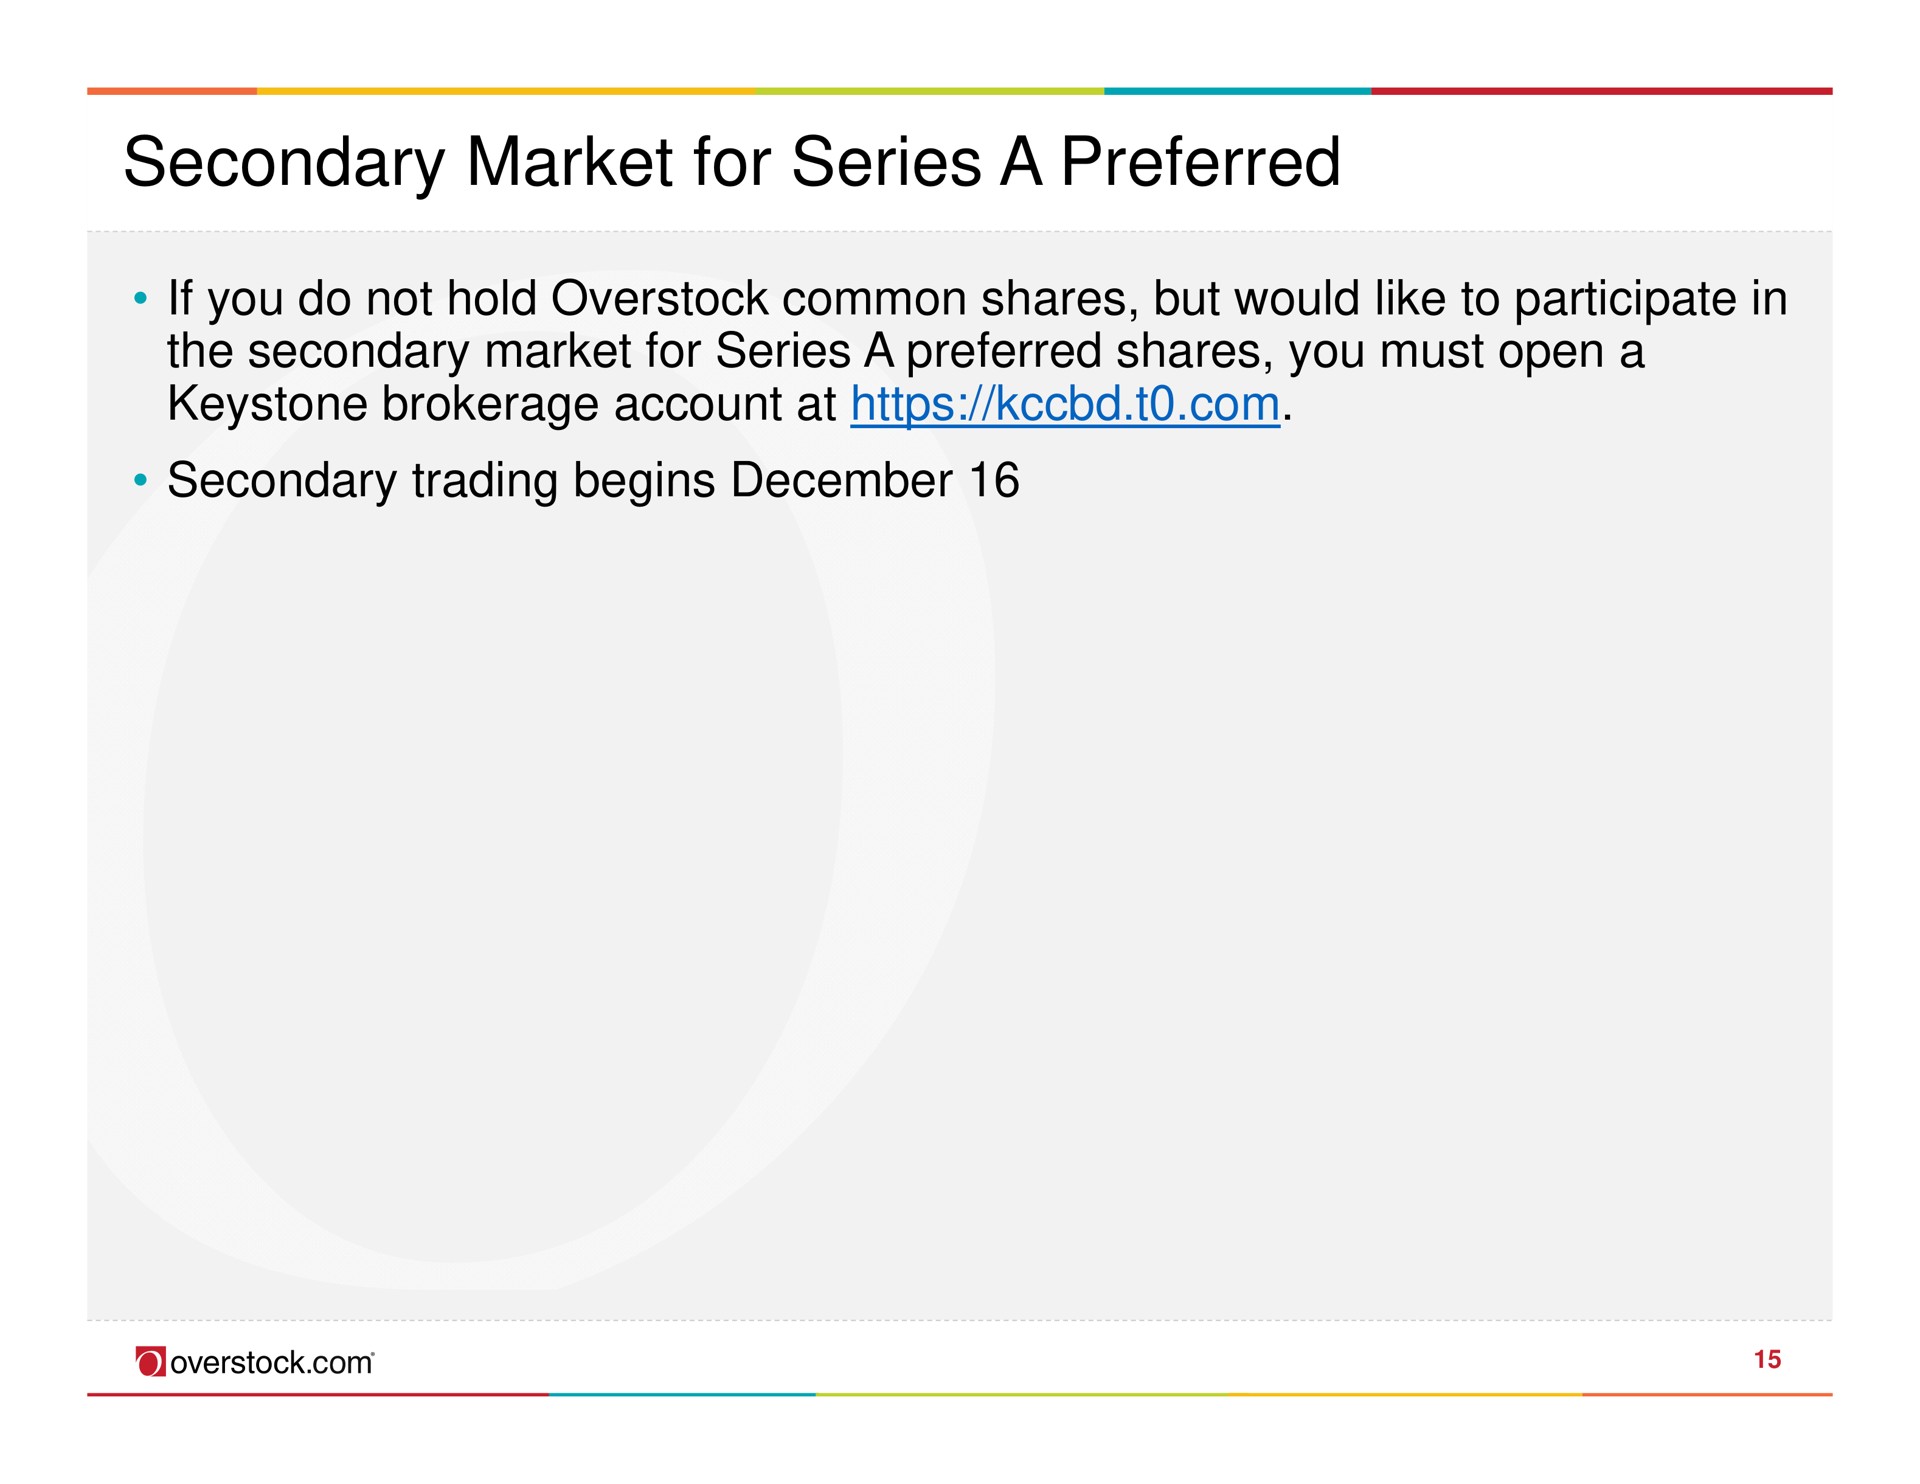 secondary market for series a preferred | Overstock